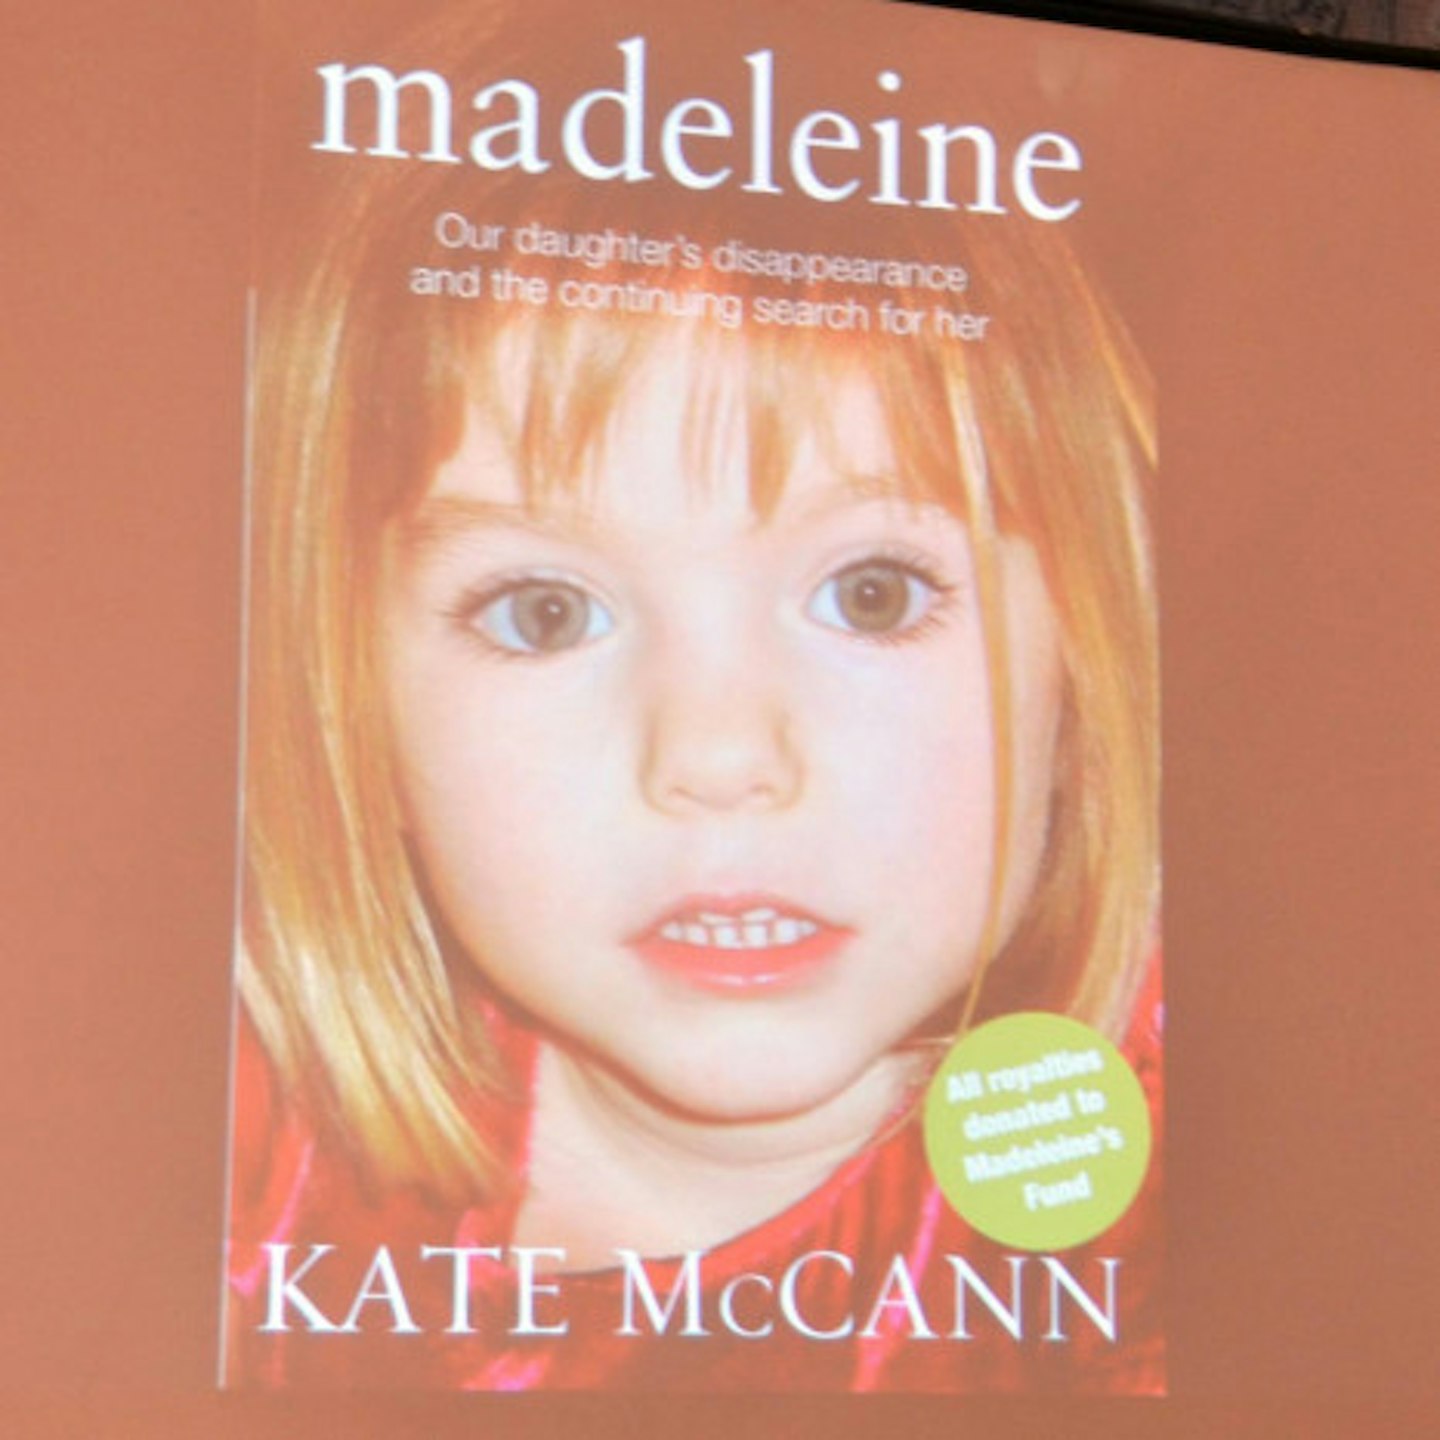 The McCann's have released a book about their ordeal, entitled 'Madeleine'